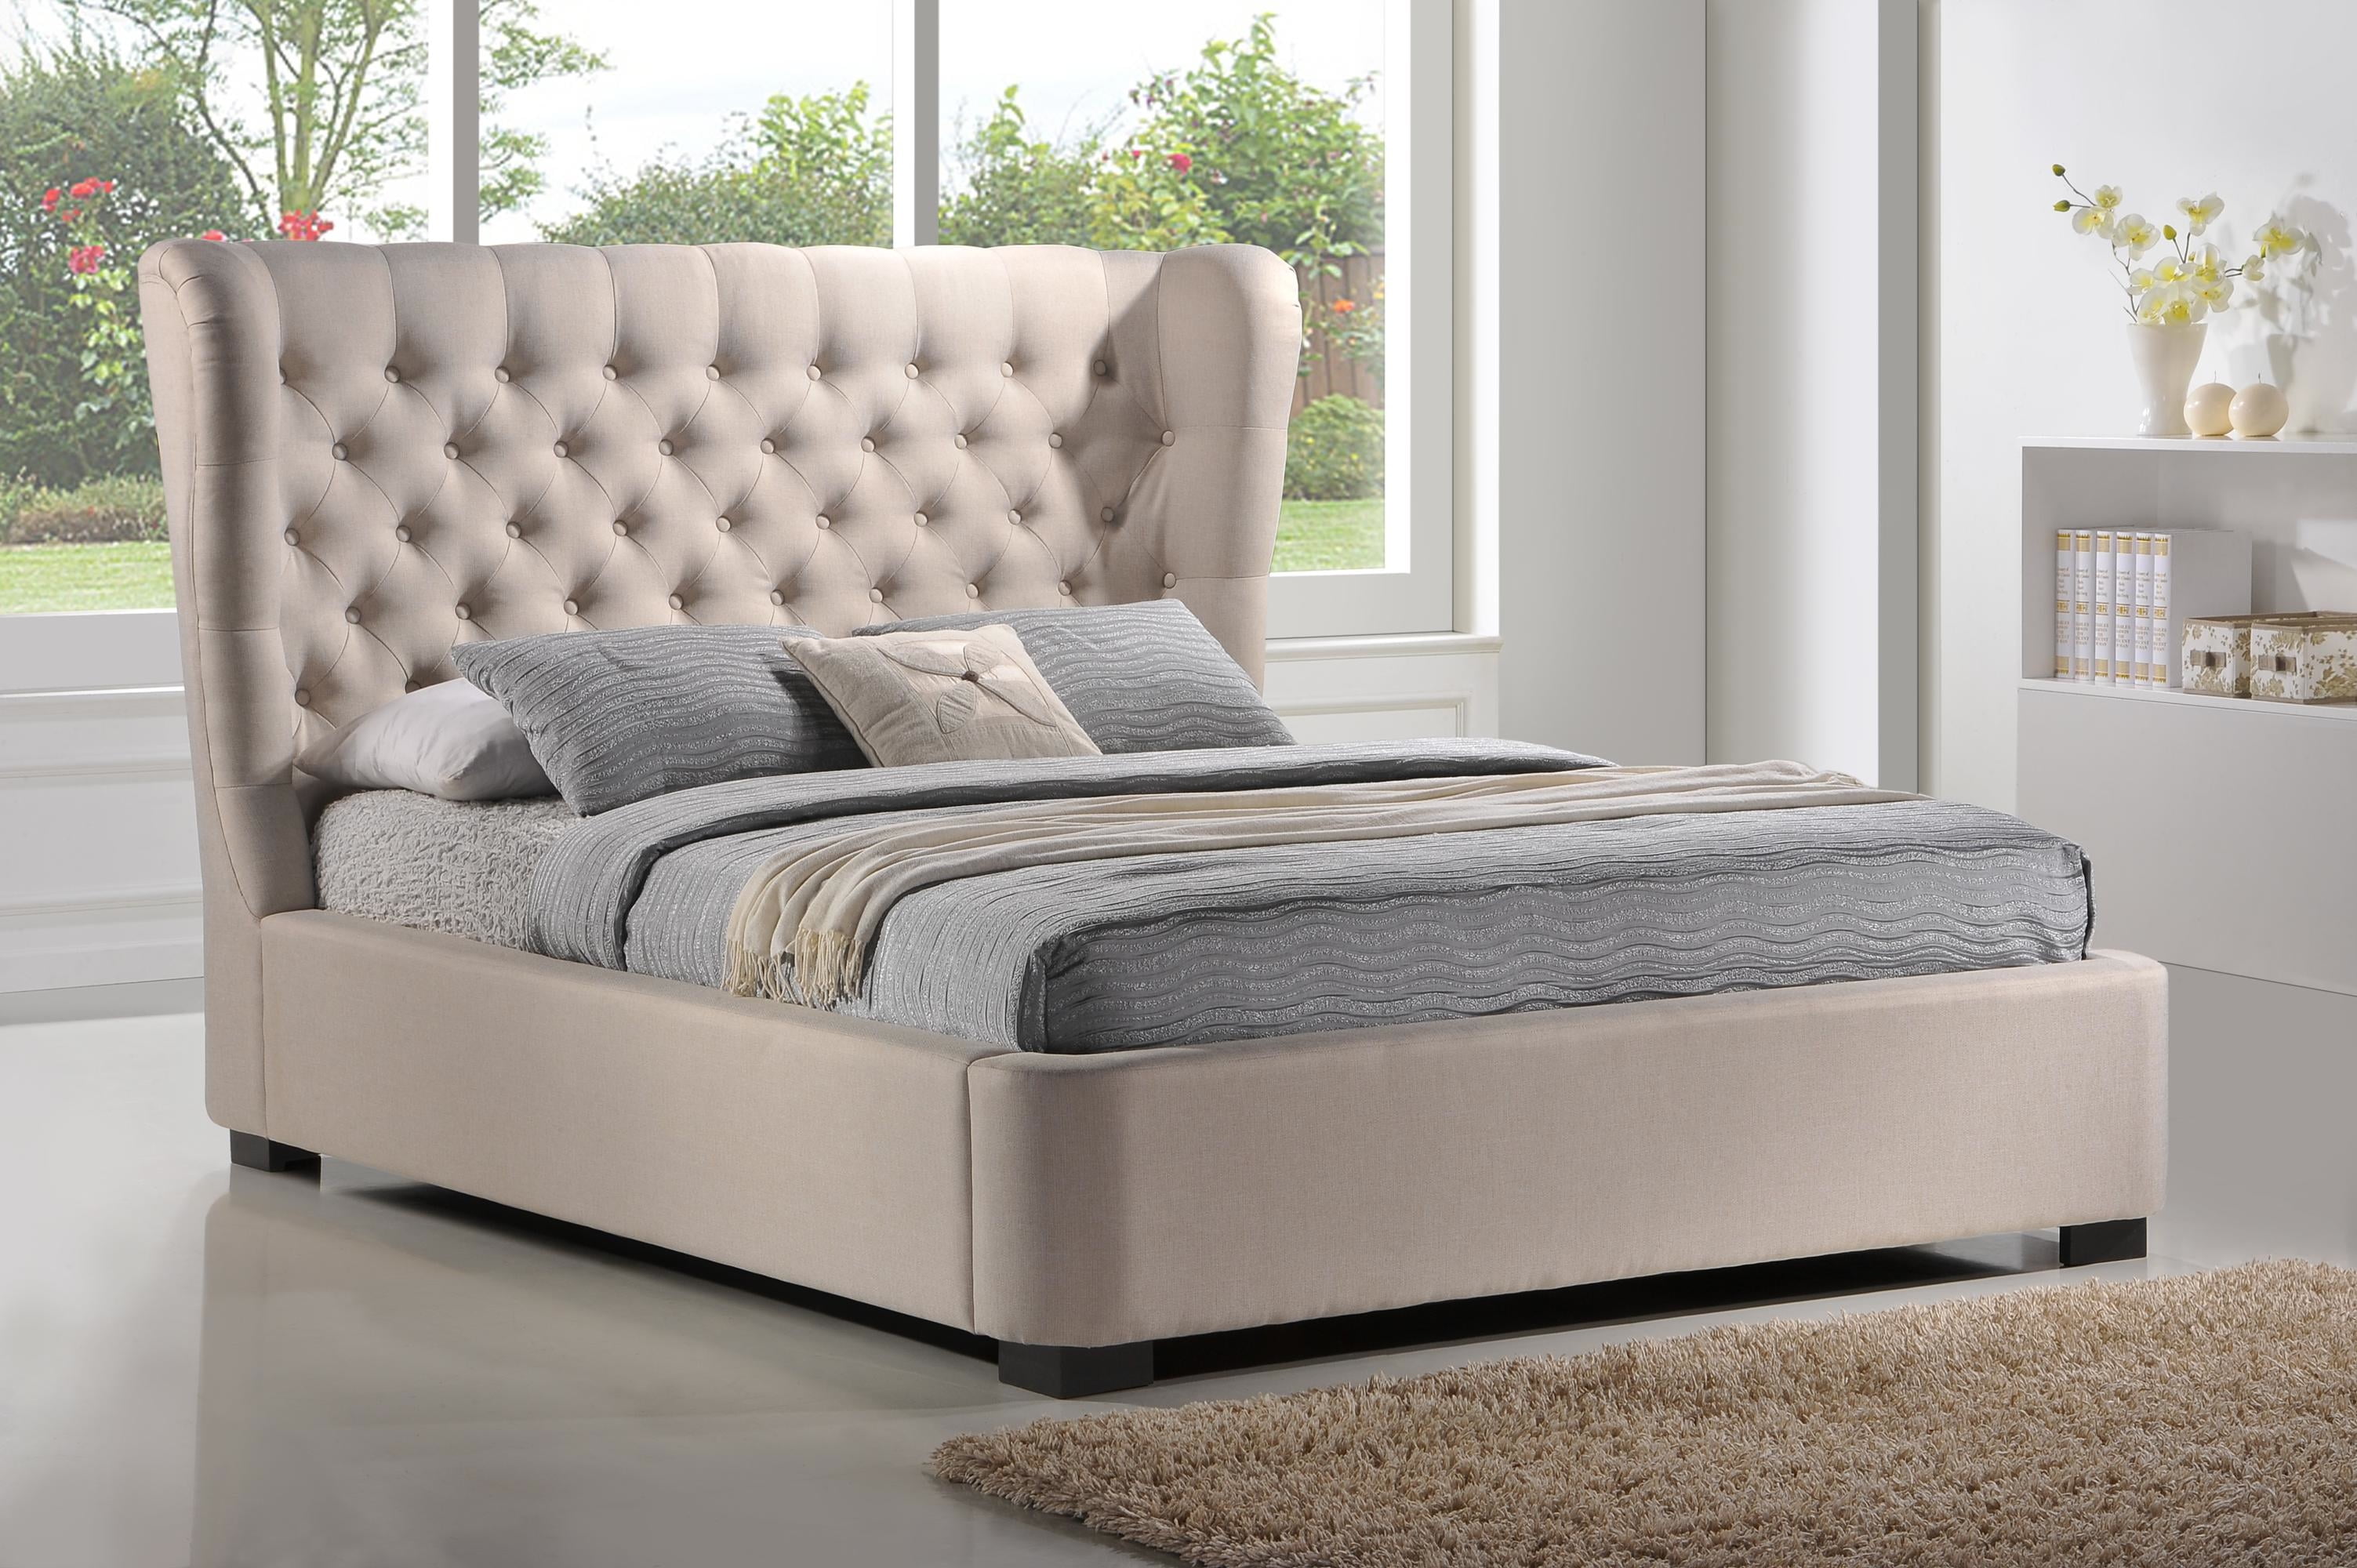 king size bed and mattress deals uk